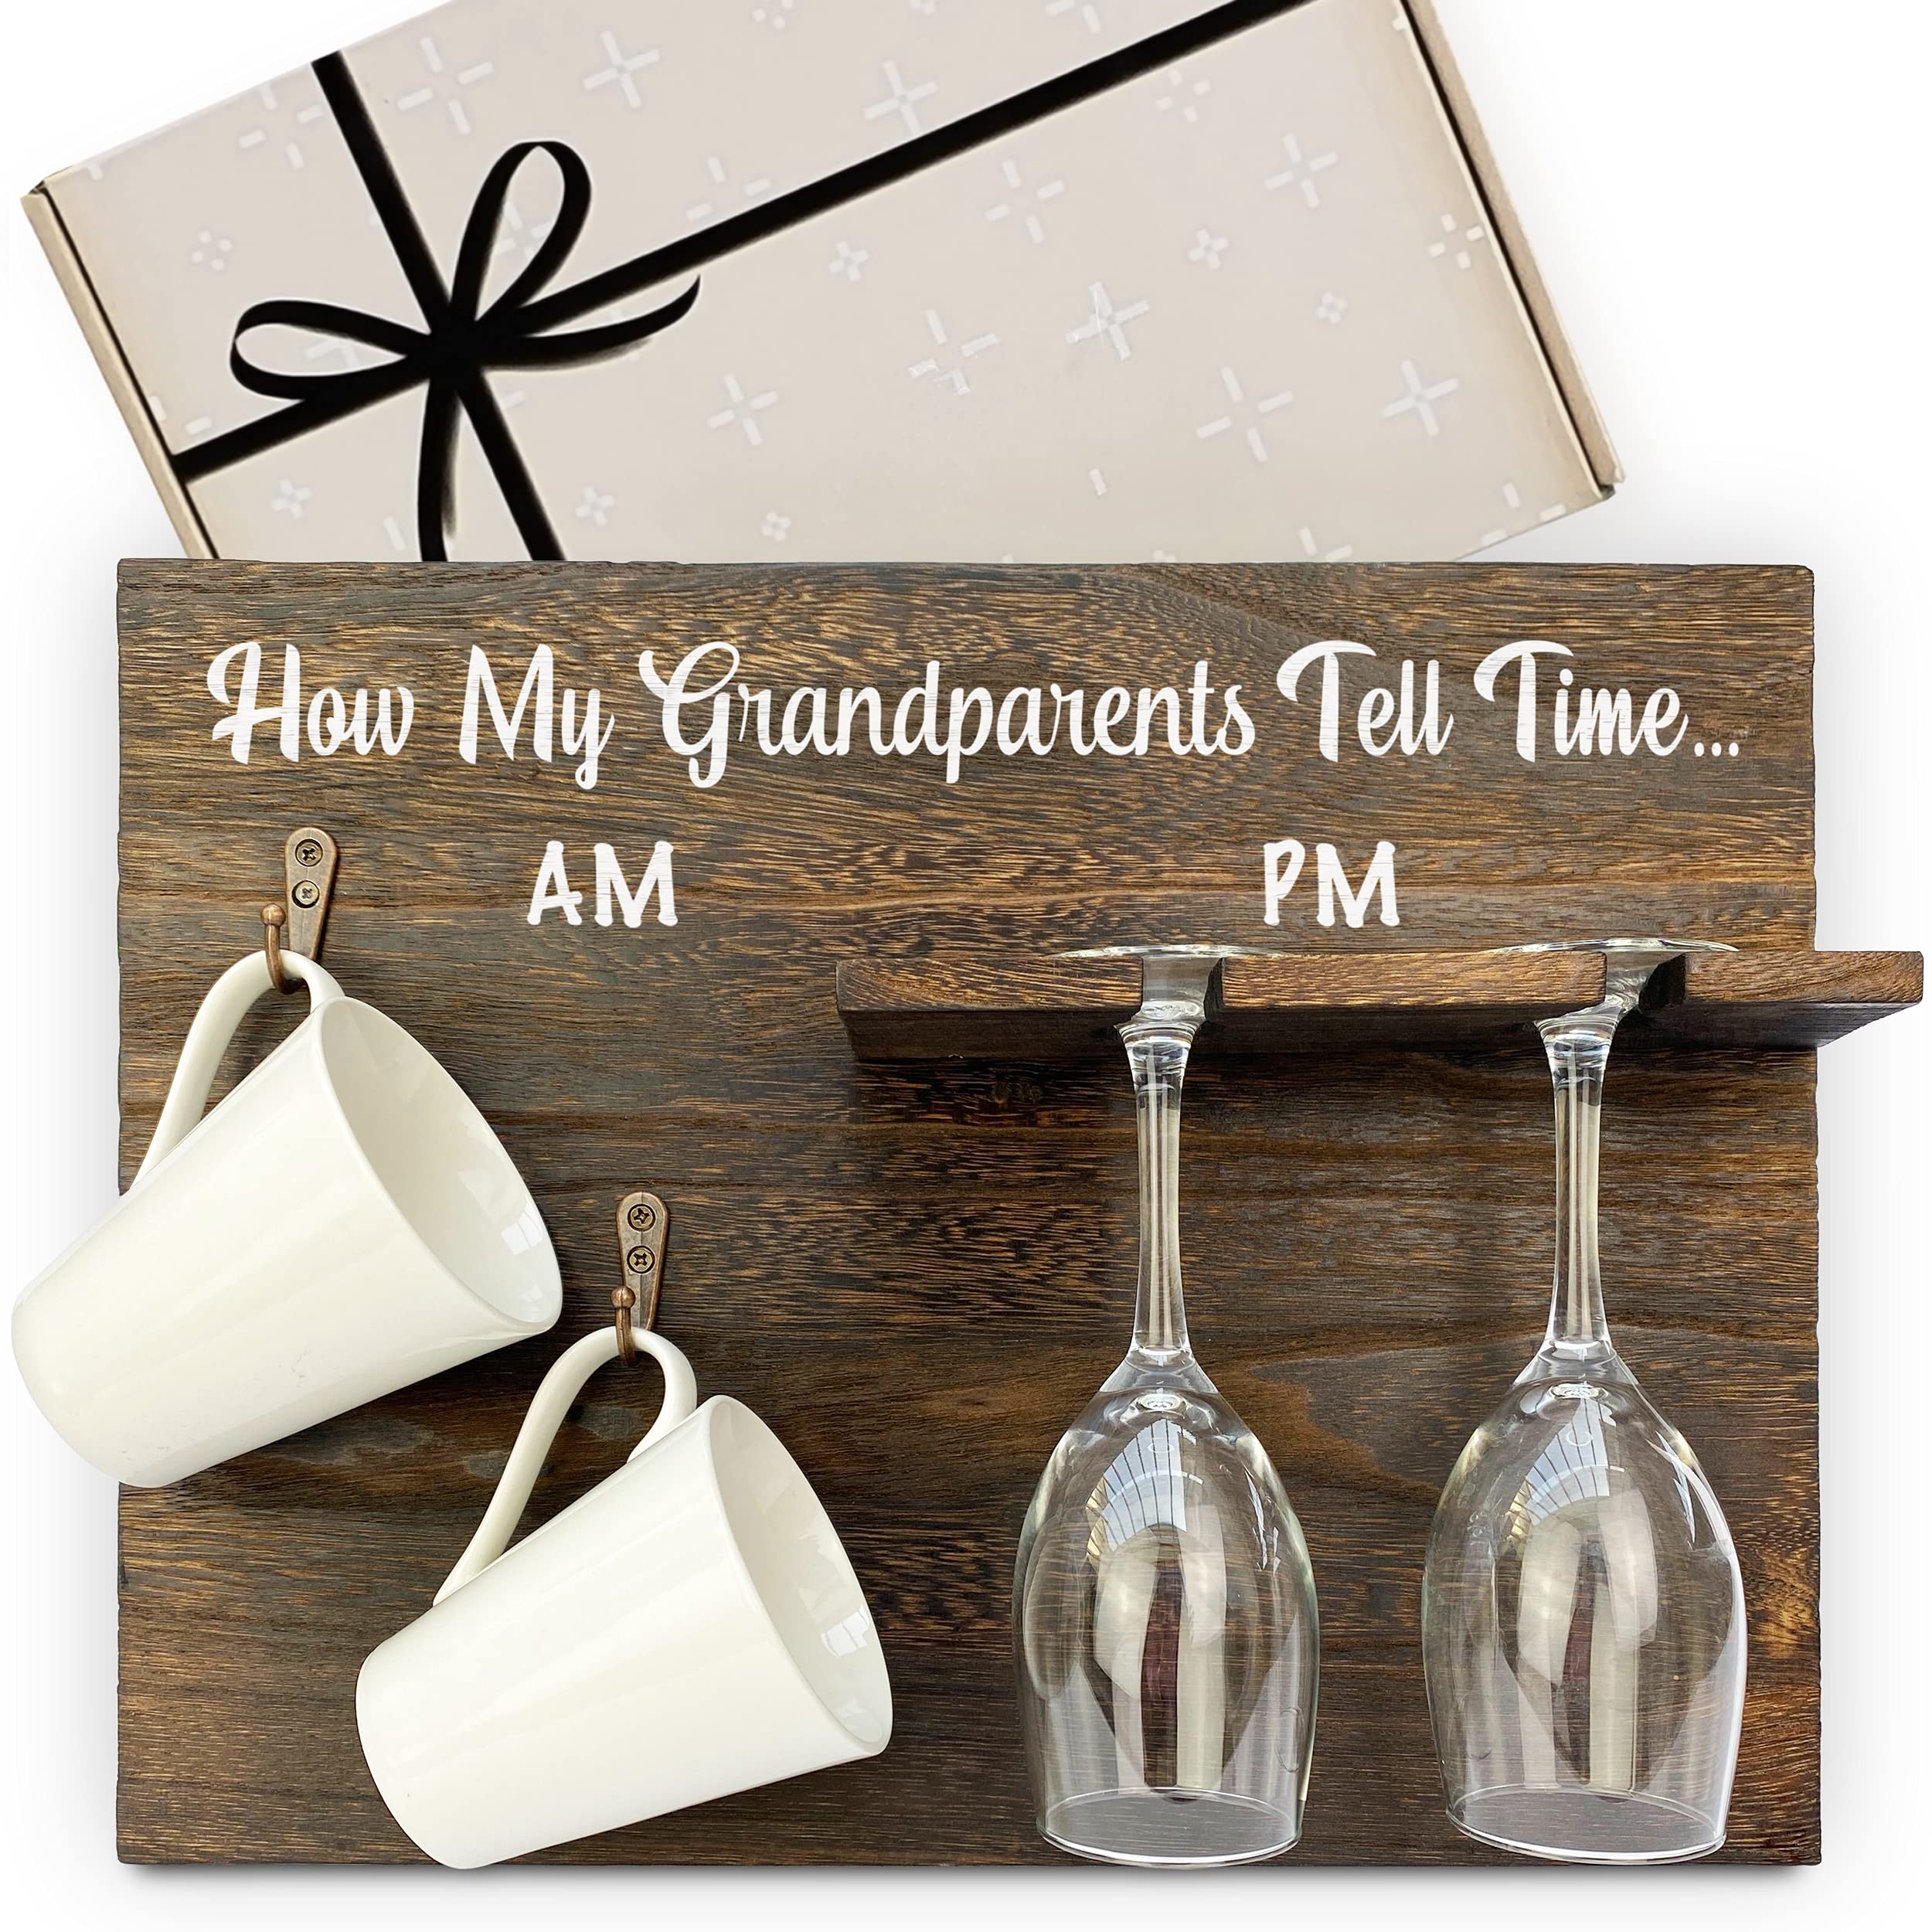 GIFTAGIRL Godmother Gifts for Mothers Day or Birthday - Sarcastic Yes, But Fun Godmother Gifts from Godchild are Perfect for Any Occasion, and Arrive Beautifully Gift Boxed. Mugs - Glasses Not Inc